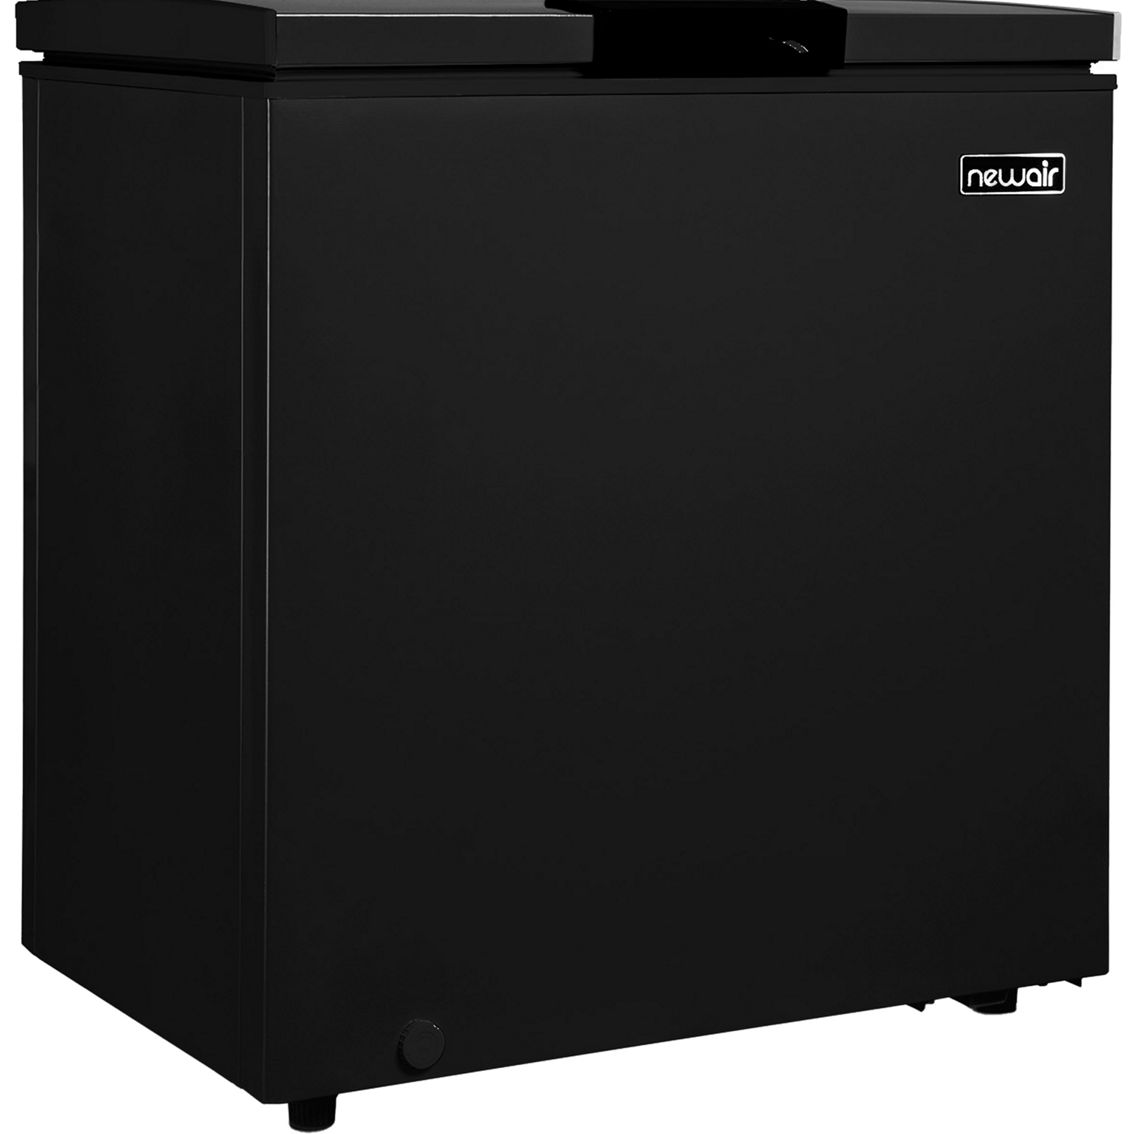 Newair 5 cu. ft. Mini Deep Chest Freezer and Refrigerator - Image 1 of 8